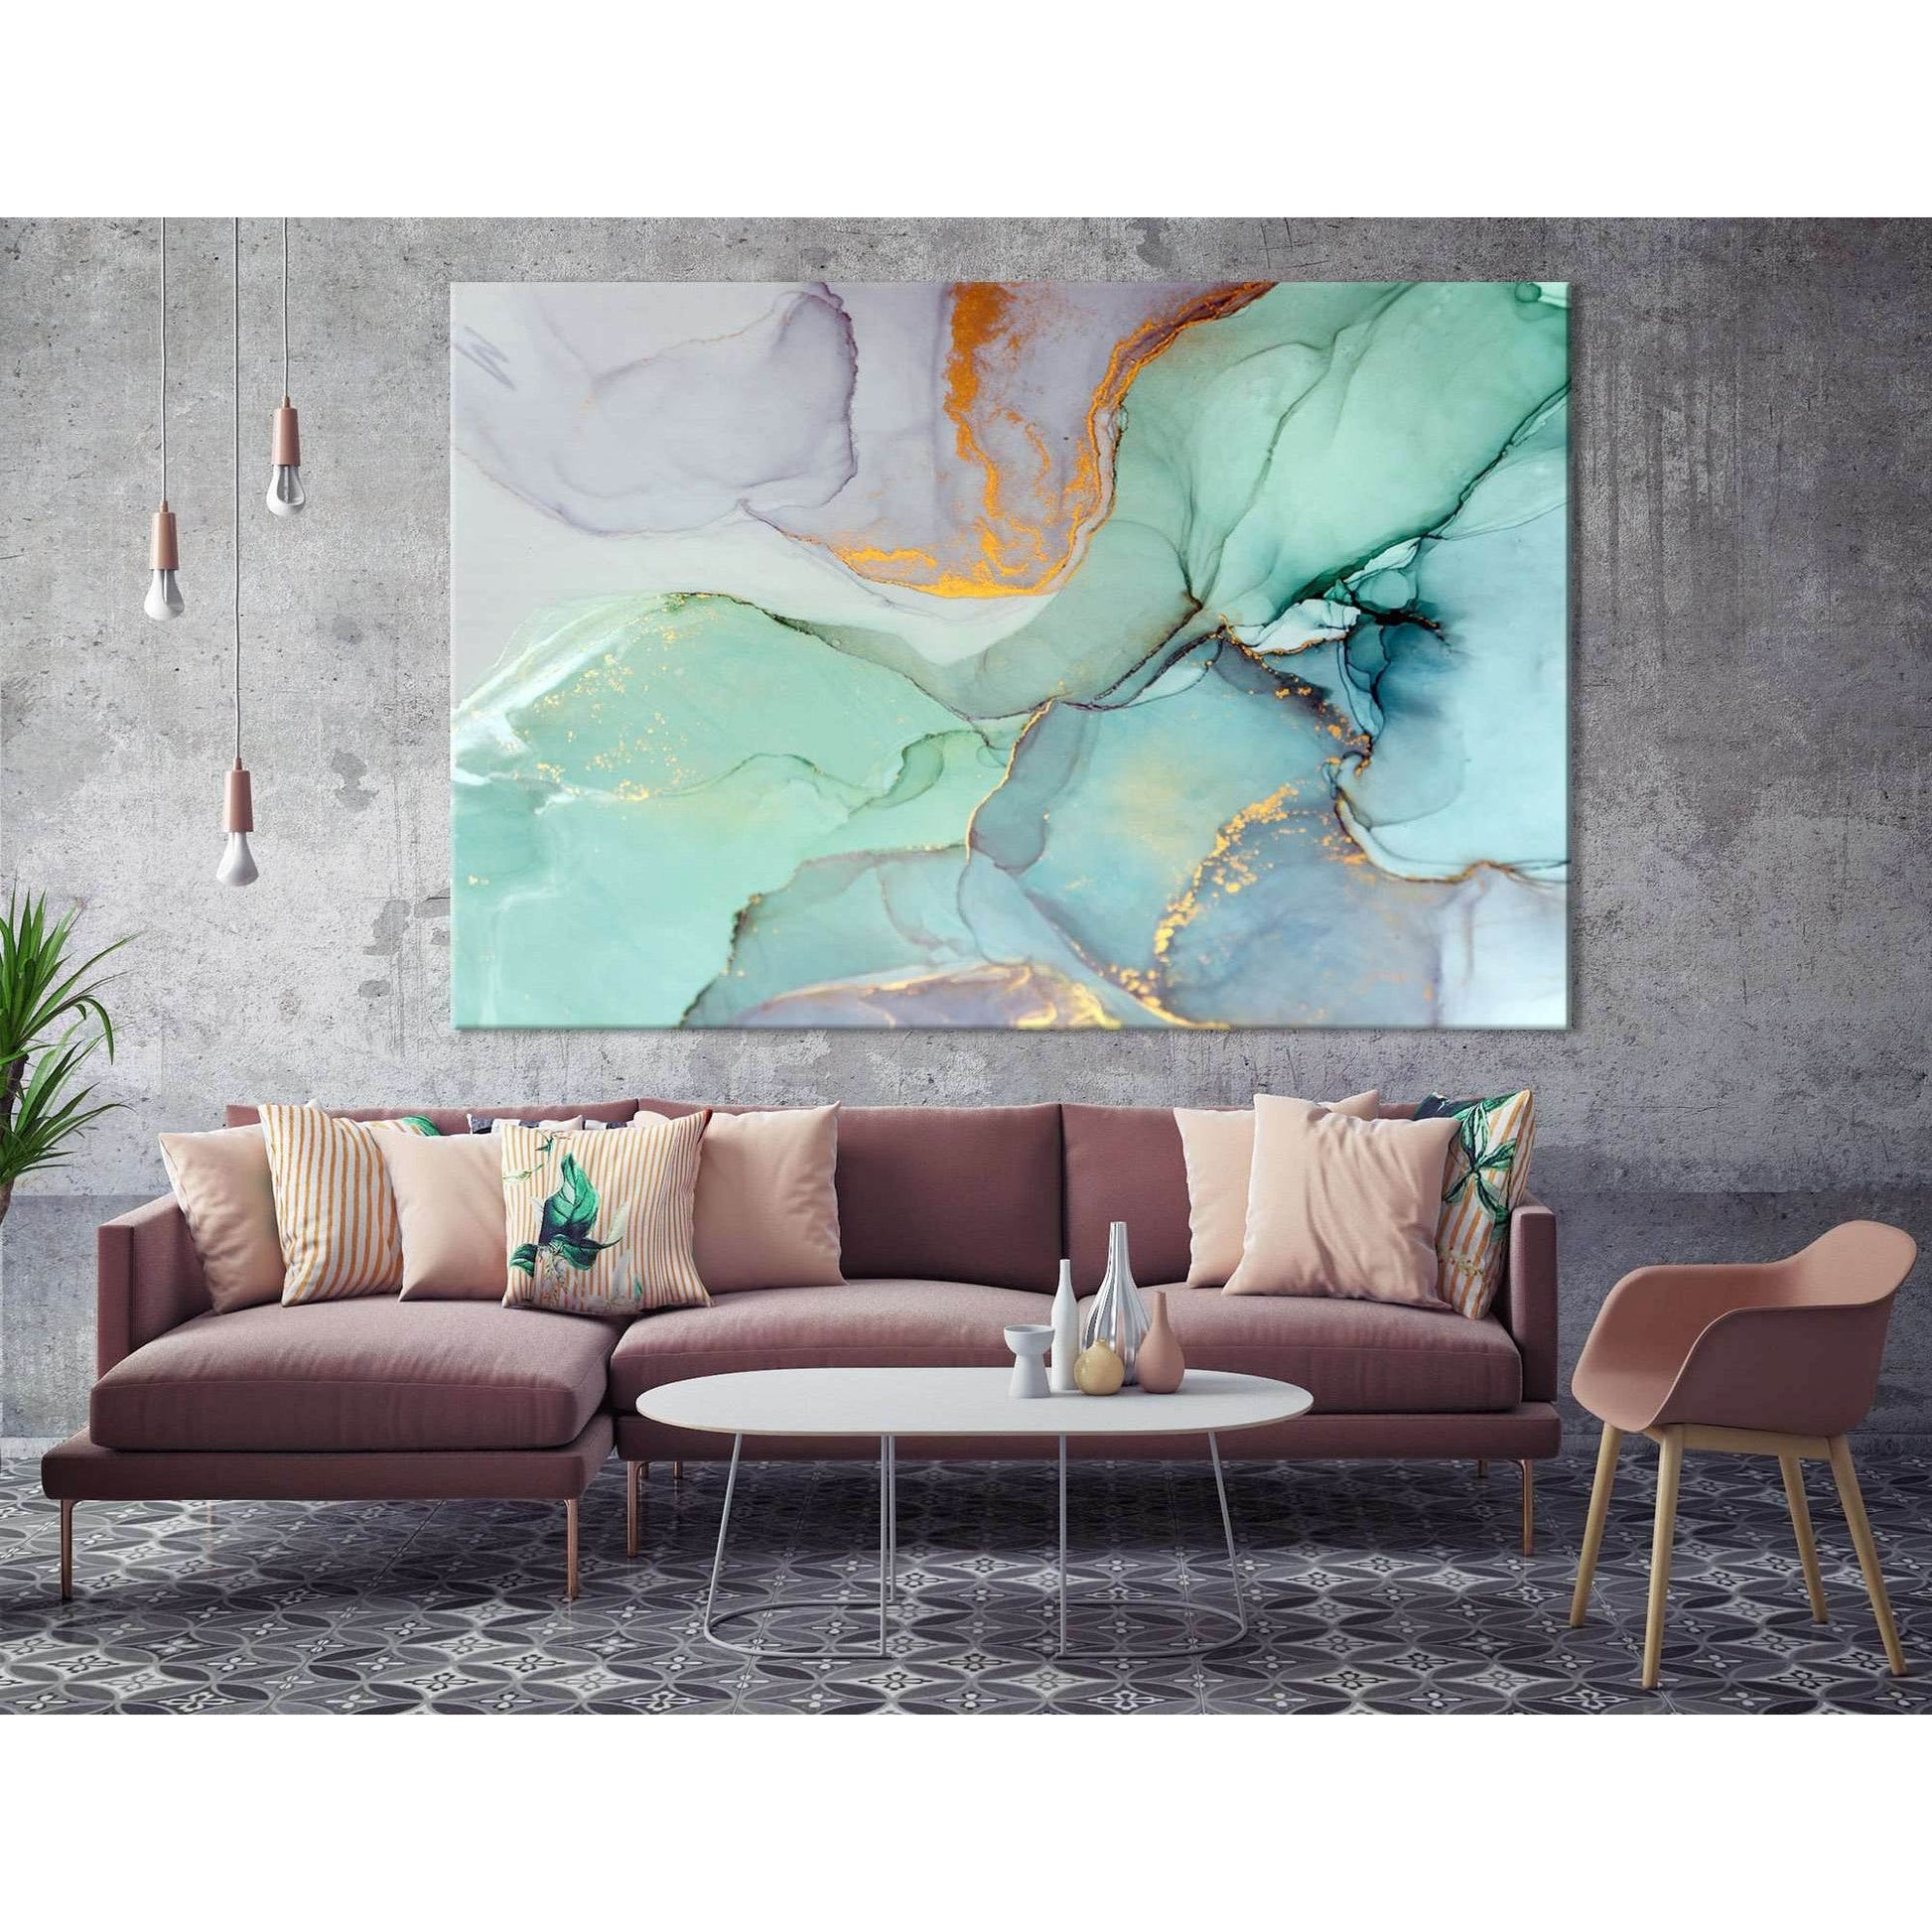 Teal Marble Artwork Ready to Hang Canvas PrintA meditative abstract print, "Teal Marble" fuses Impressionistic watercolor blotting with scrolling marble details and dashes of brushwork to create a dynamic yet soothing piece. Marbled and streaked white and